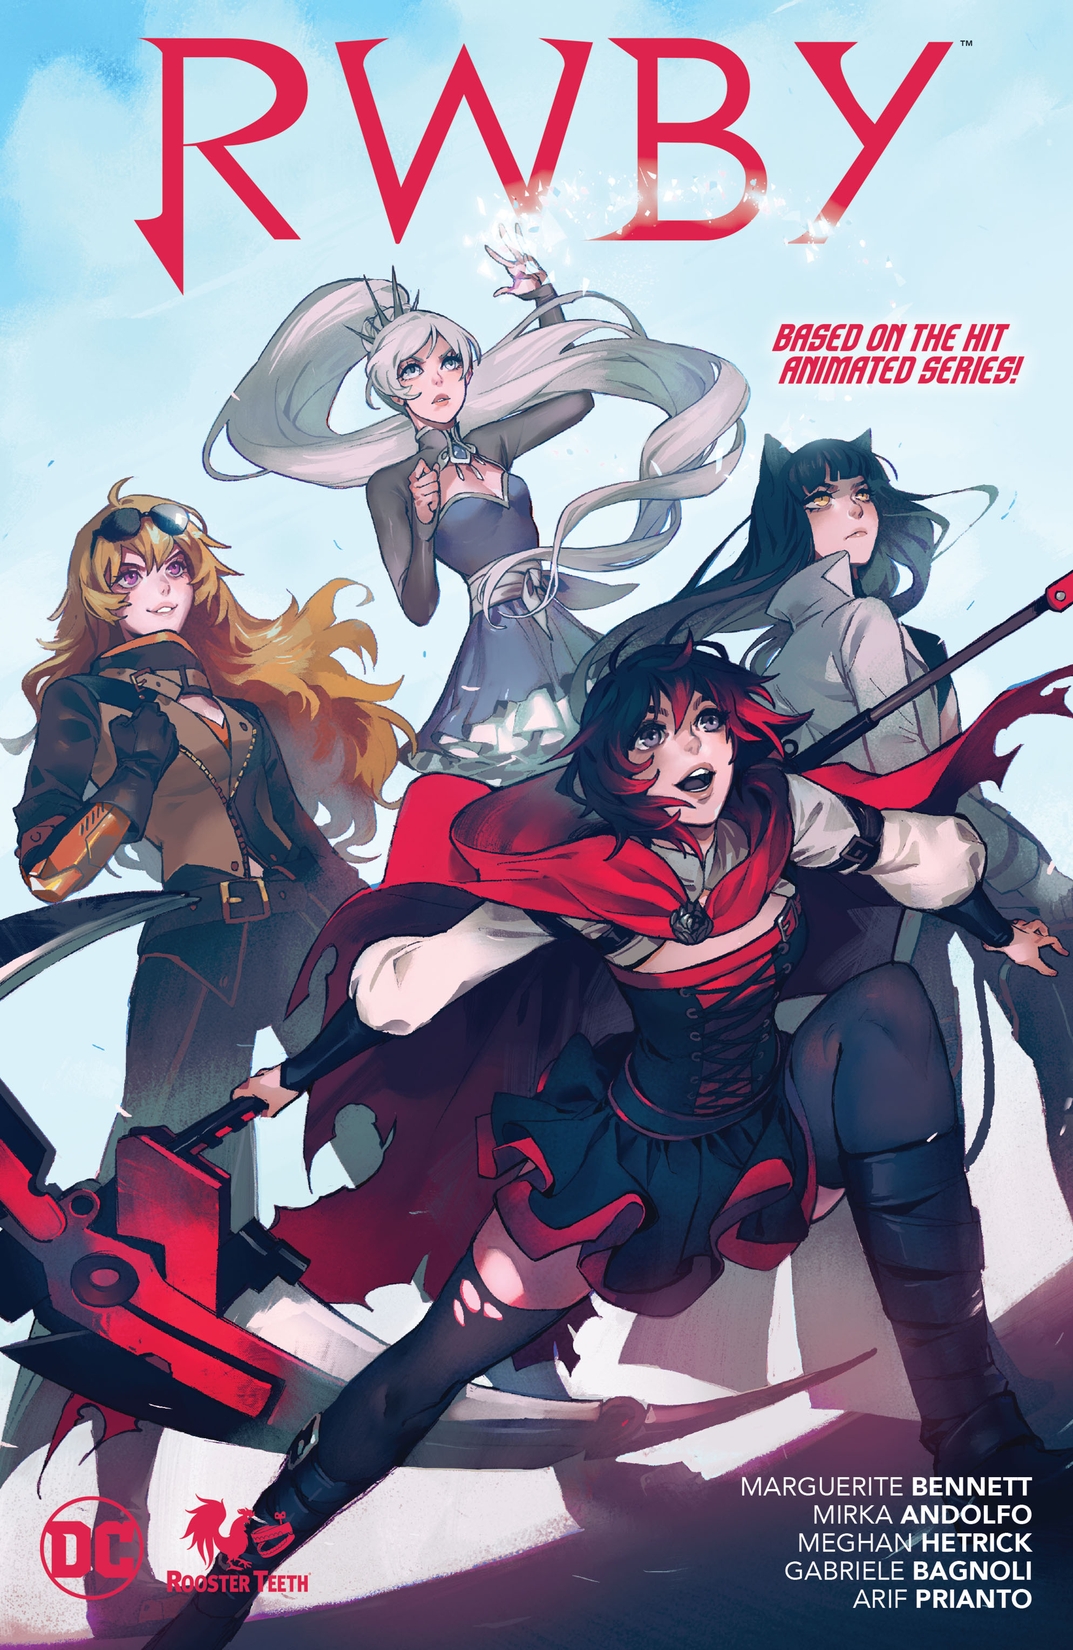 RWBY preview images